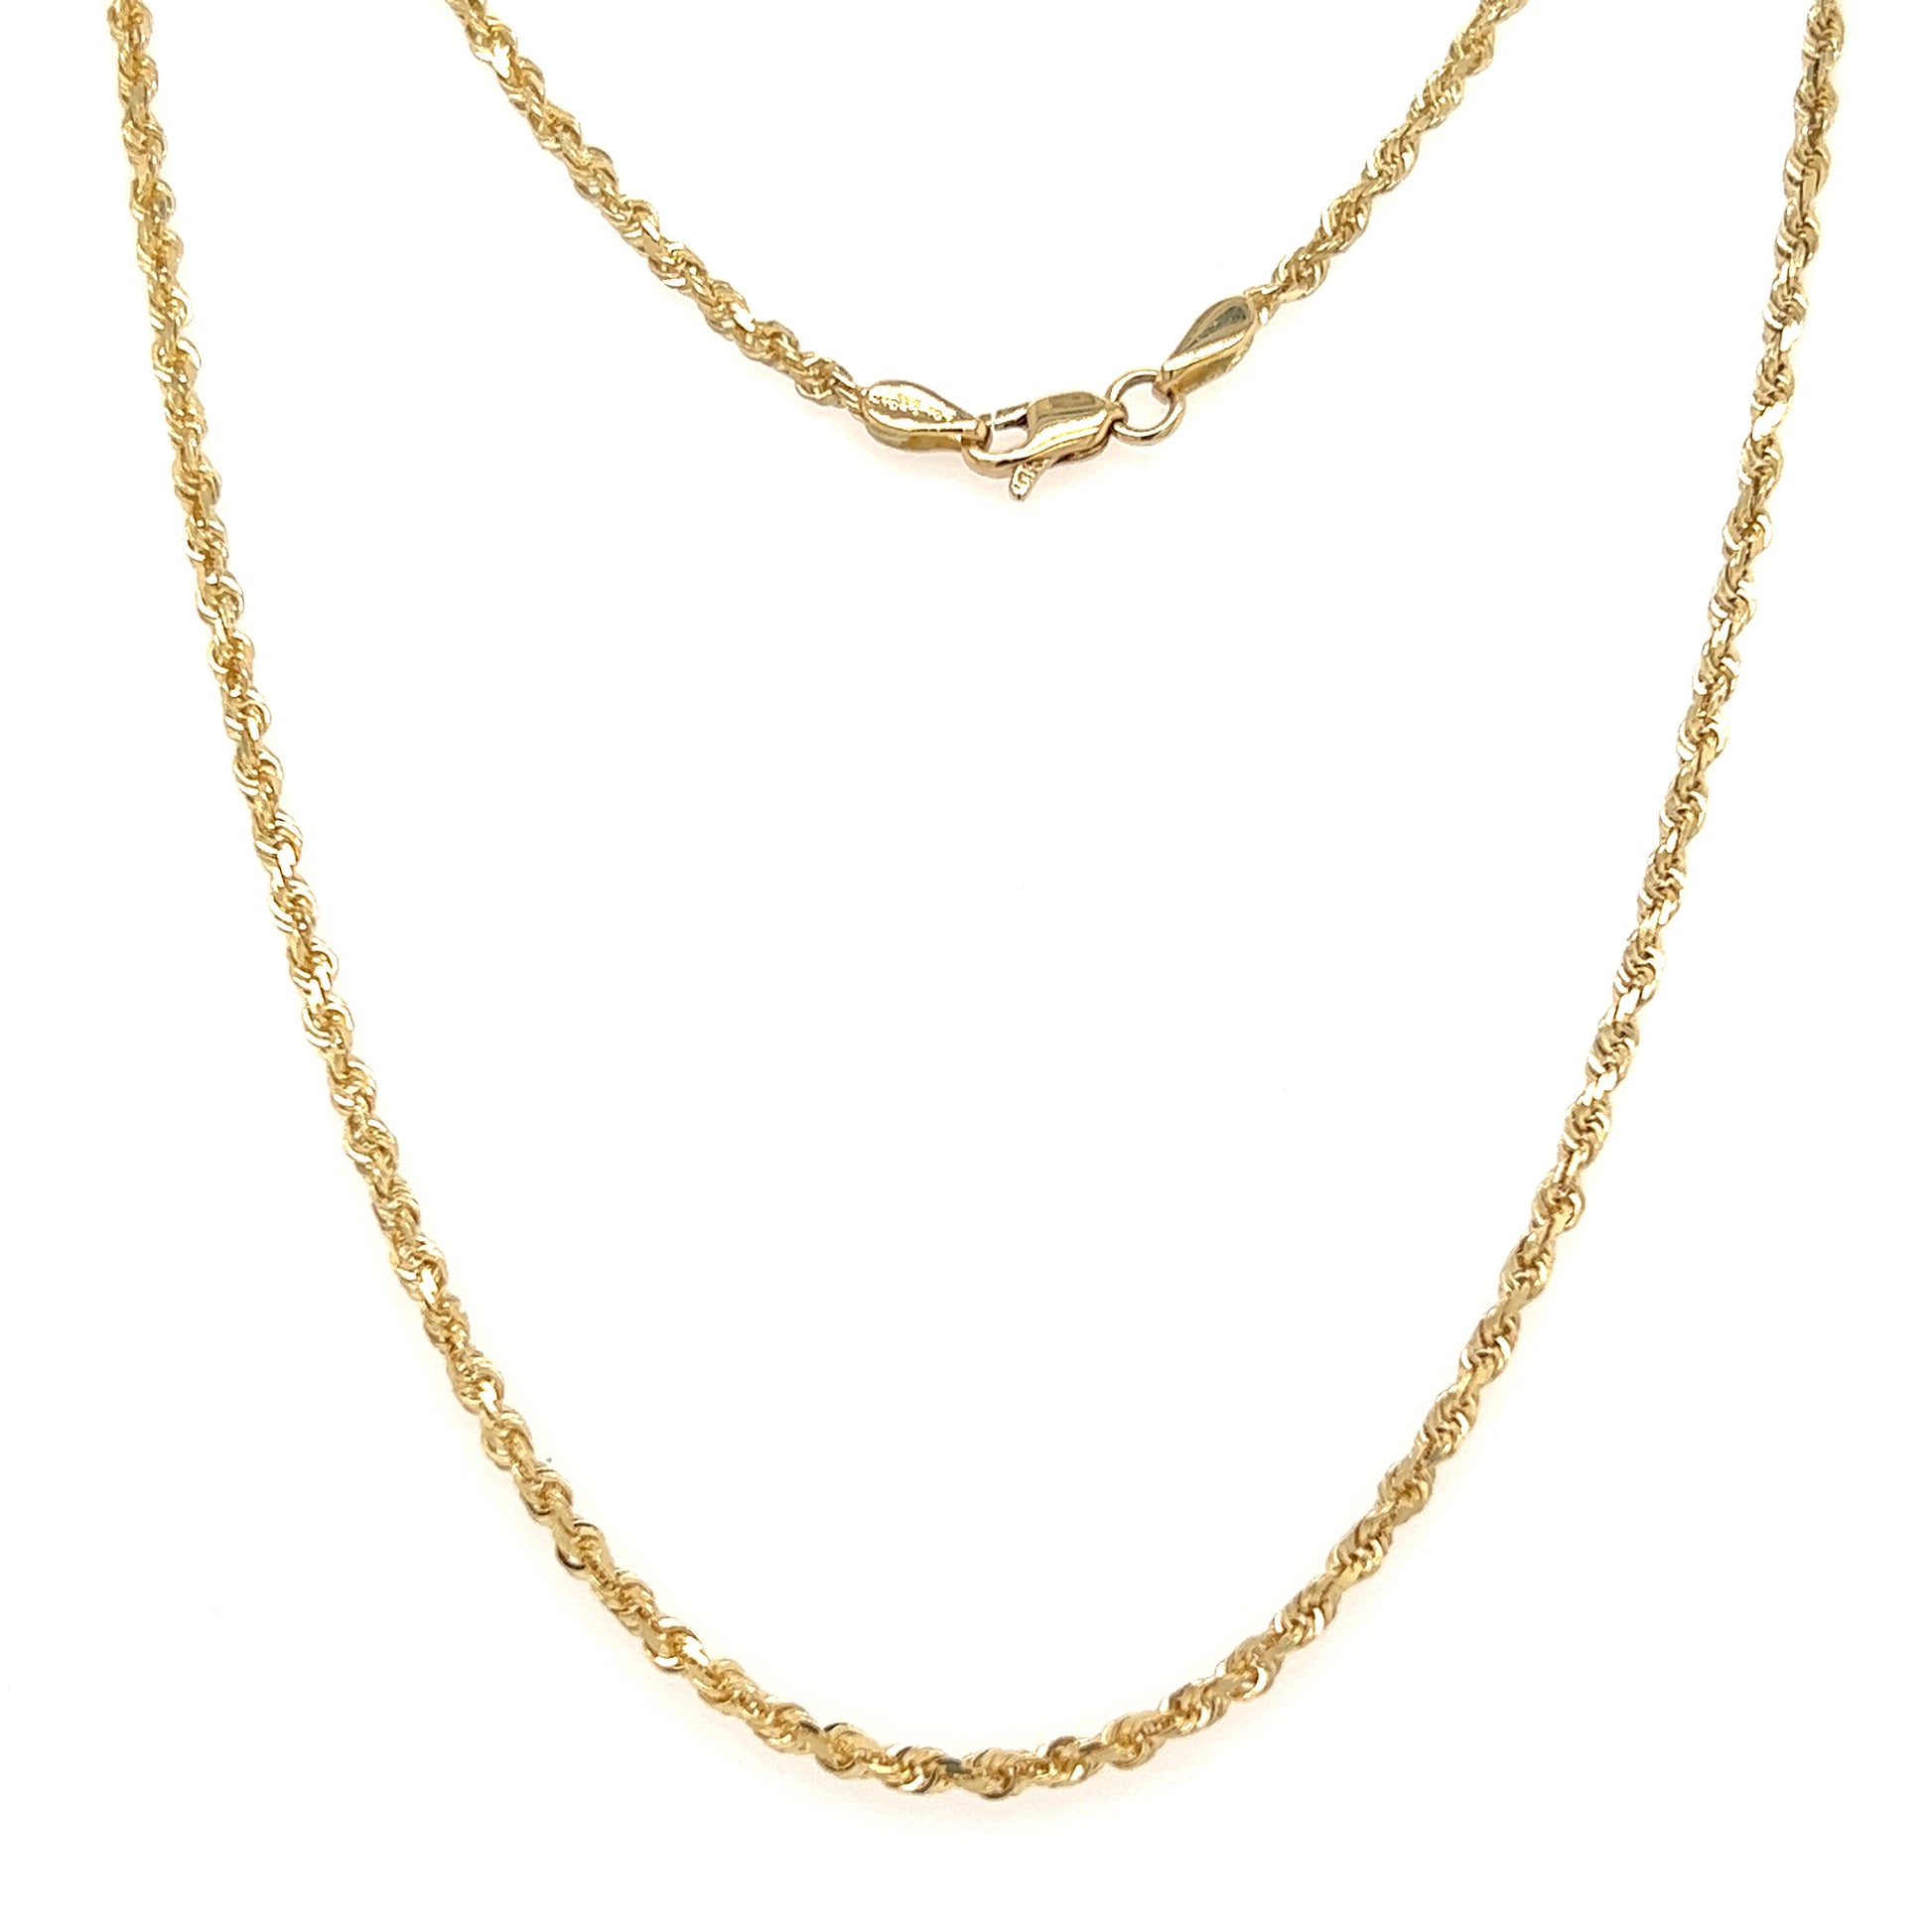 Rope Chain 2.15mm with 20in Length in 10K Yellow Gold Full Chain View